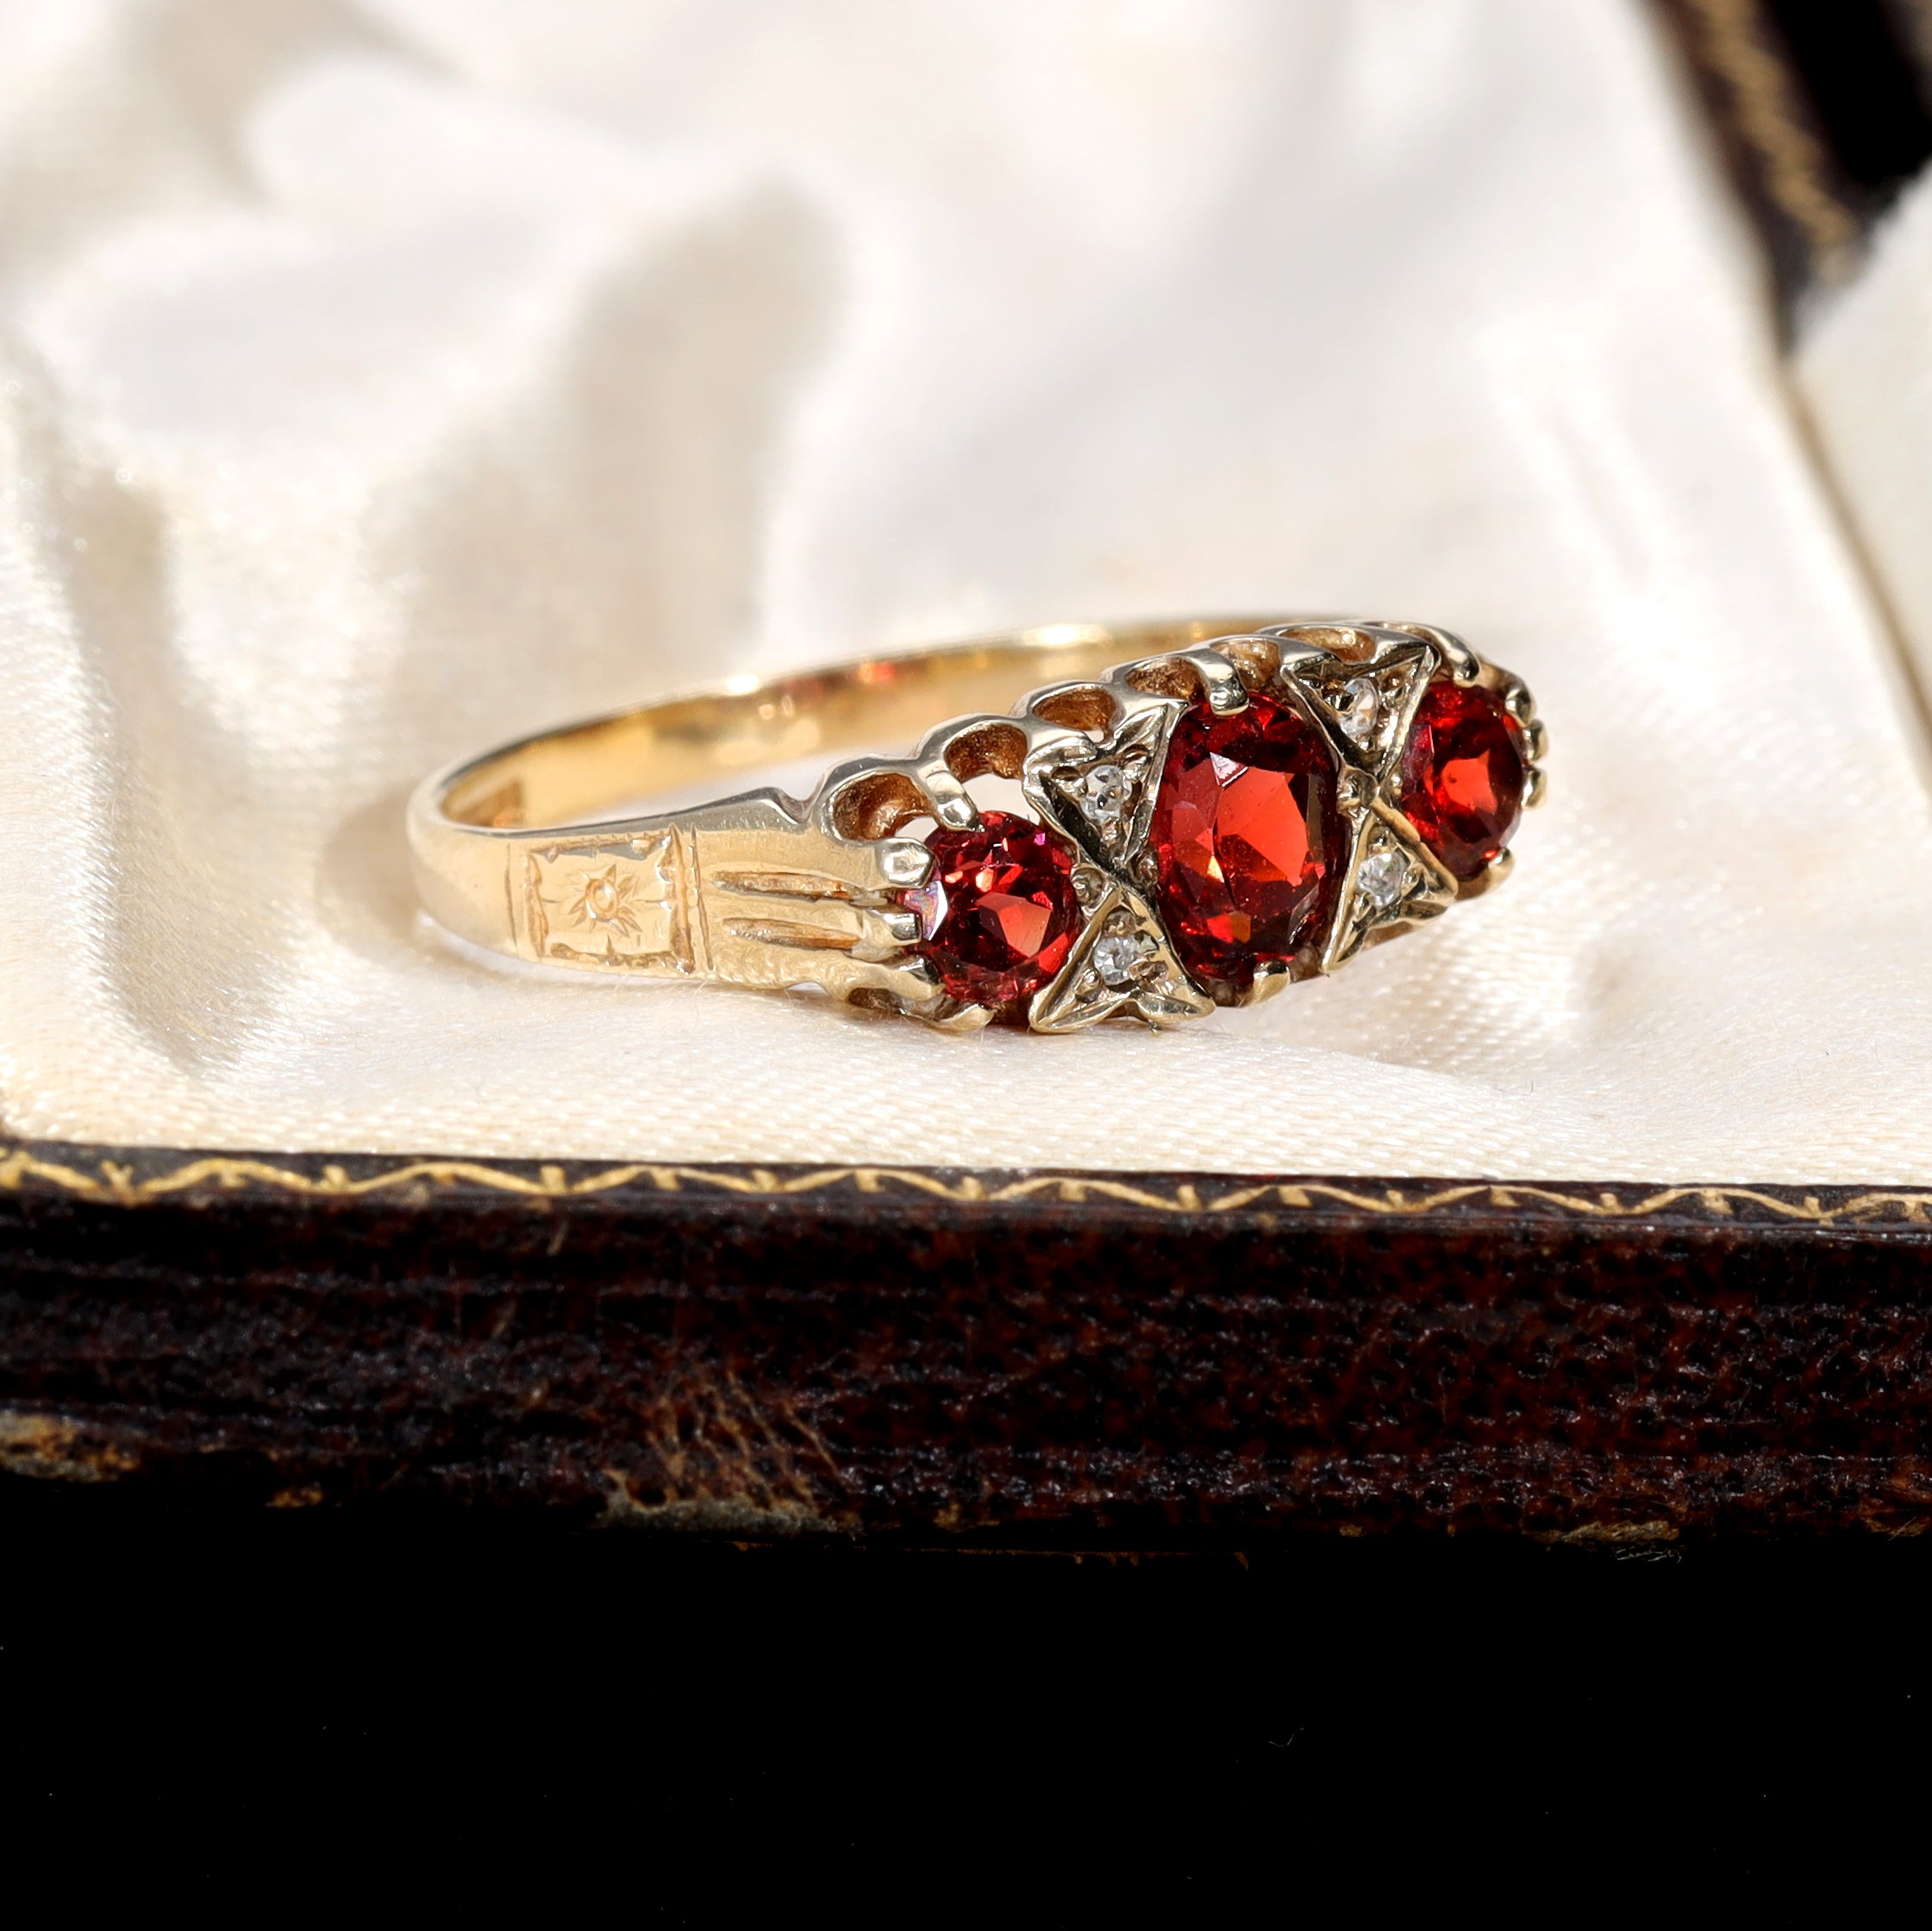 The Vintage Garnet and Diamond Floral Ring - Antique Jewellers